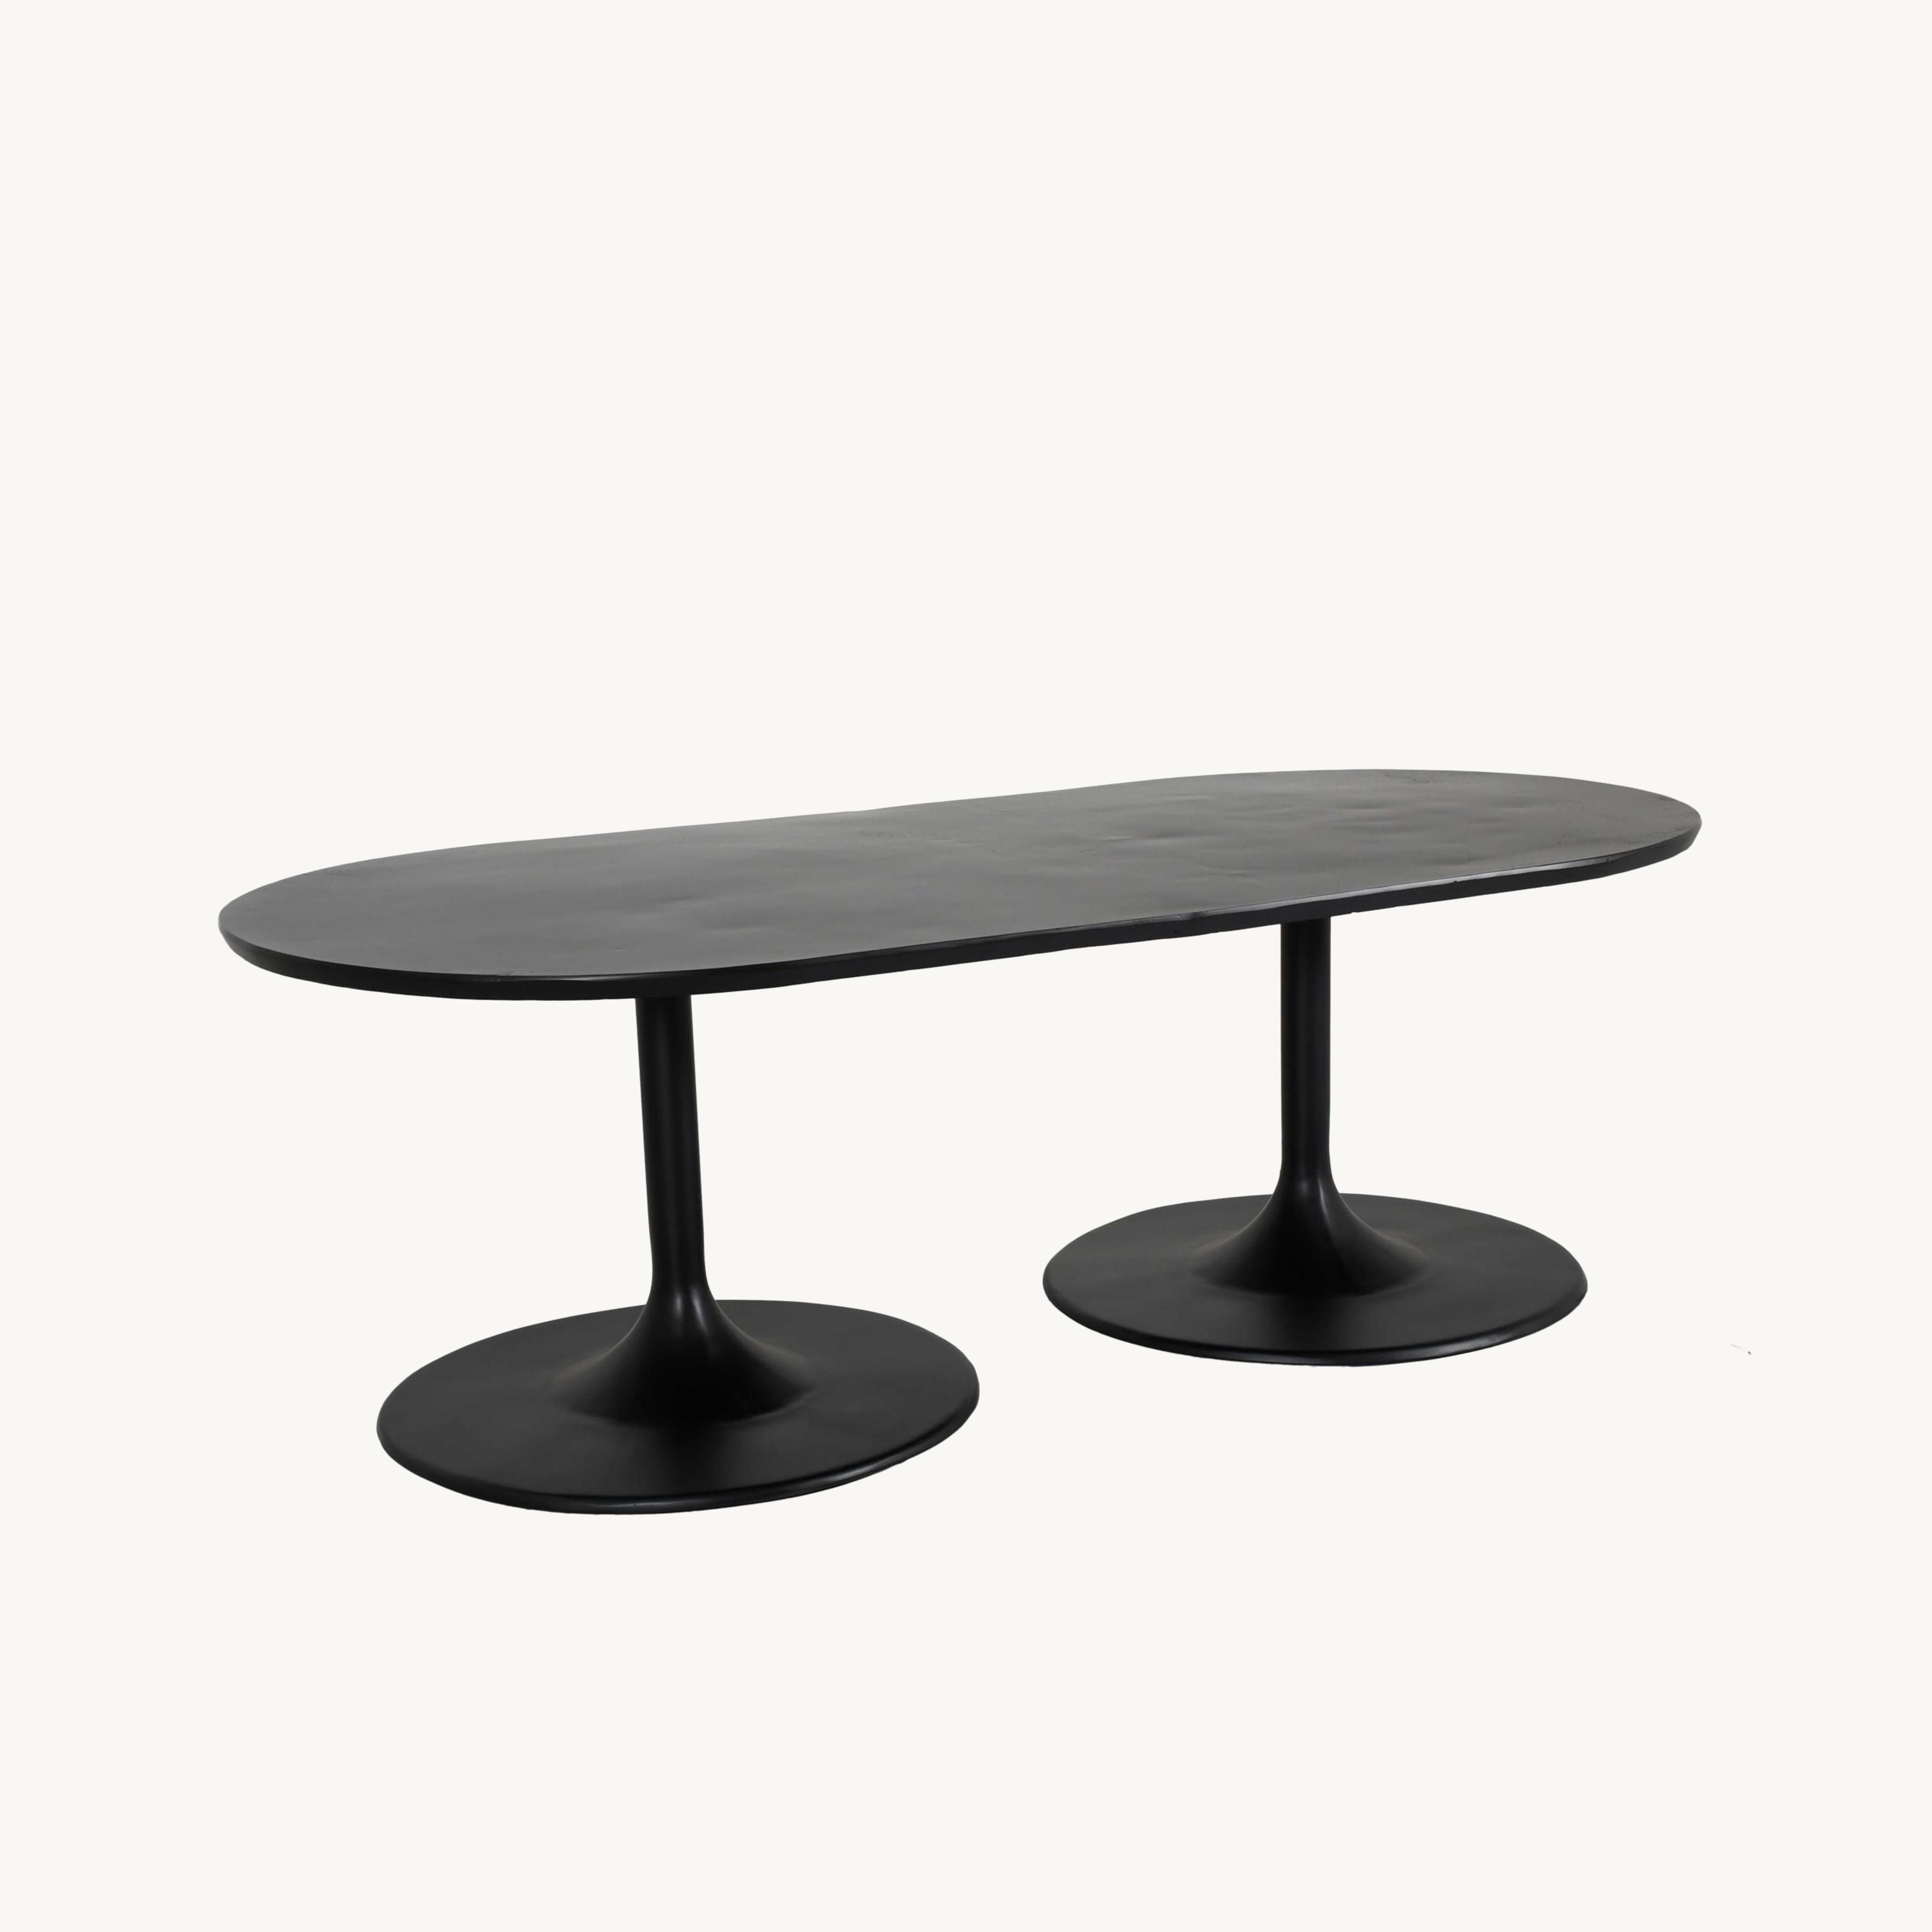 Tulip 84" Oval Dining Table By Castelle